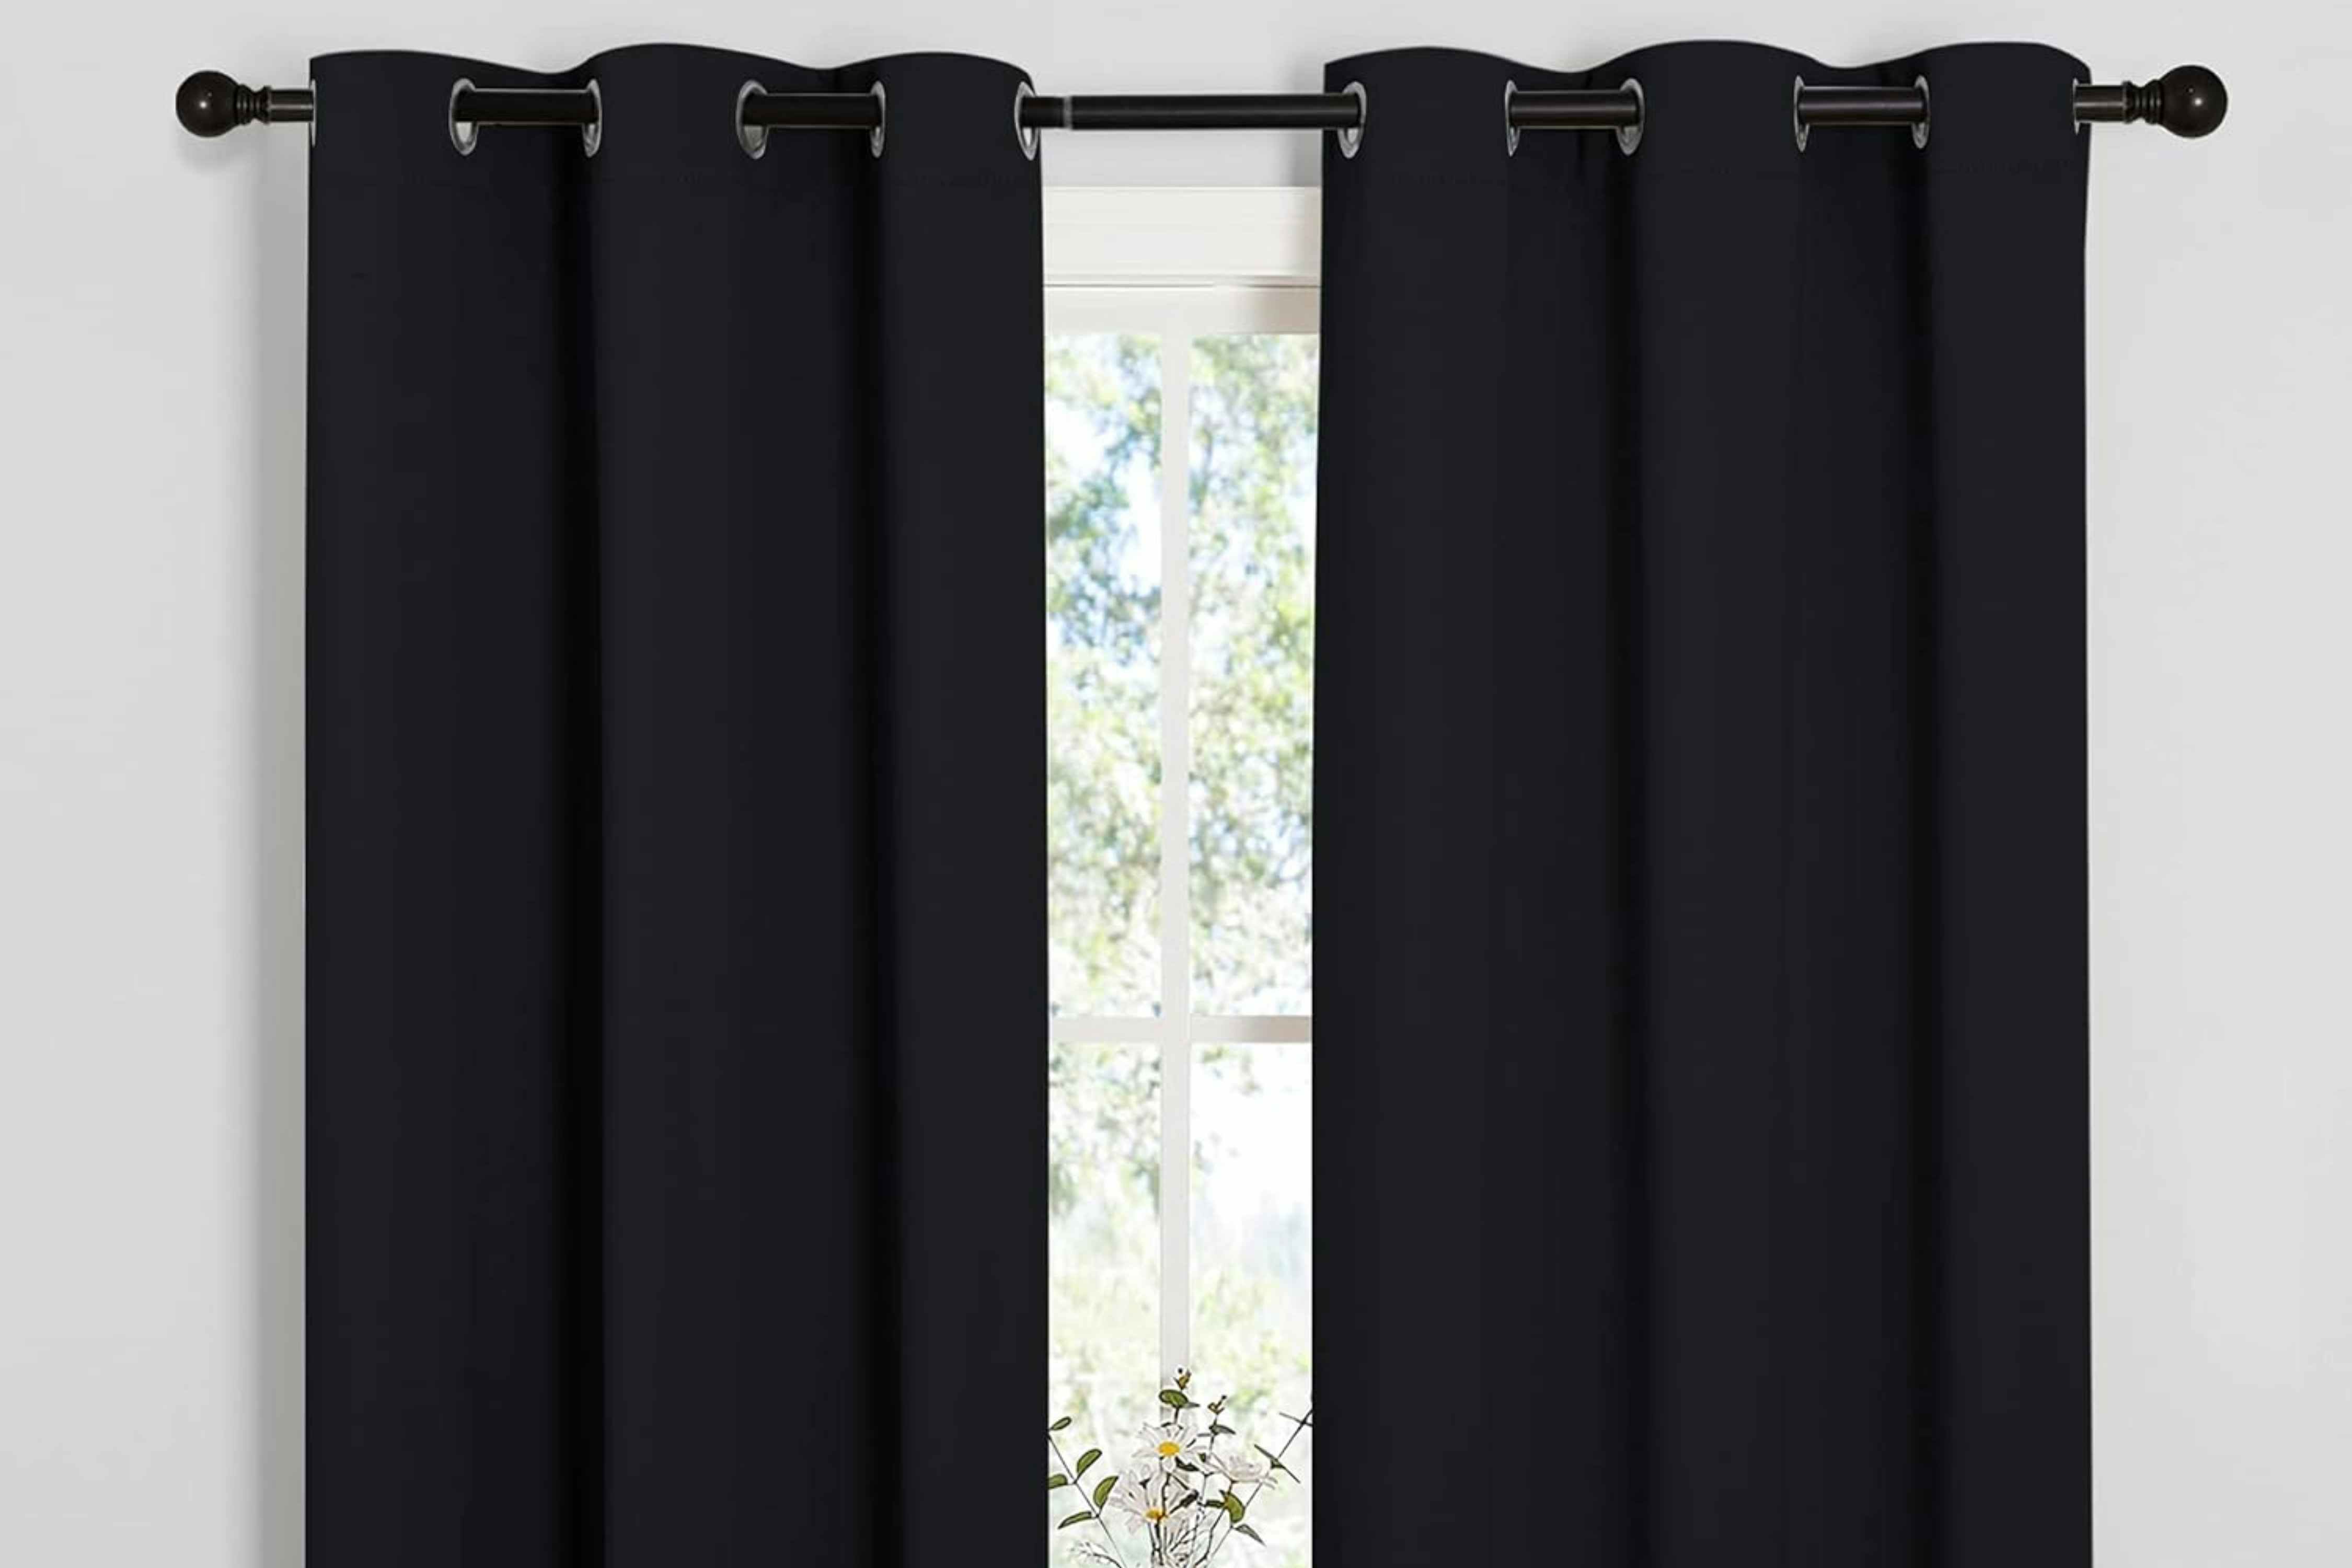 Blackout Curtains With 115,000 Ratings on Amazon, Now Just $13.08